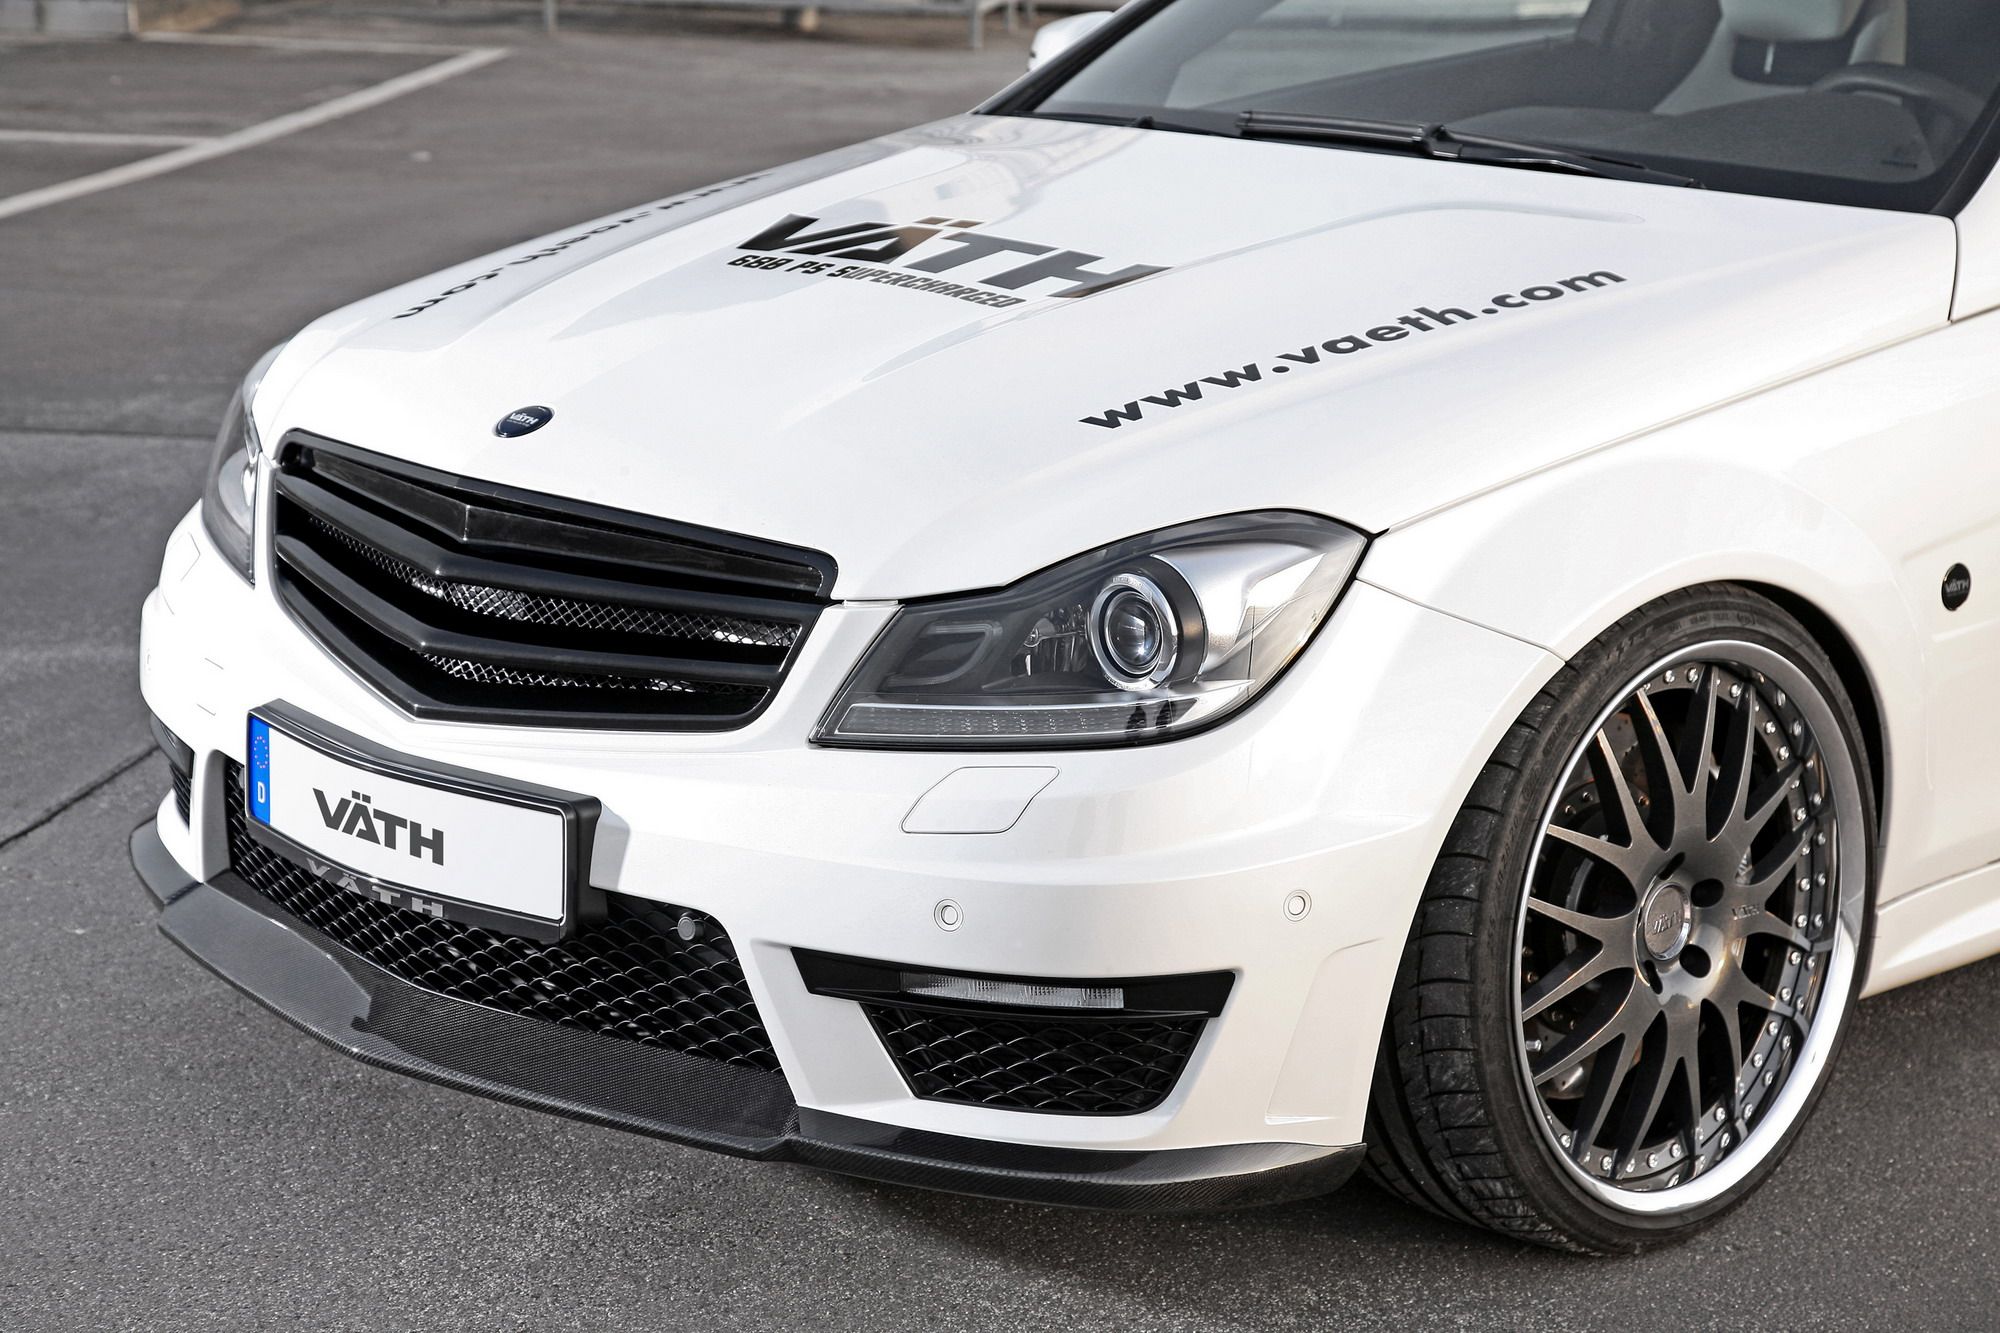 2012 Mercedes C63 AMG Coupe V63 Supercharged by Vath